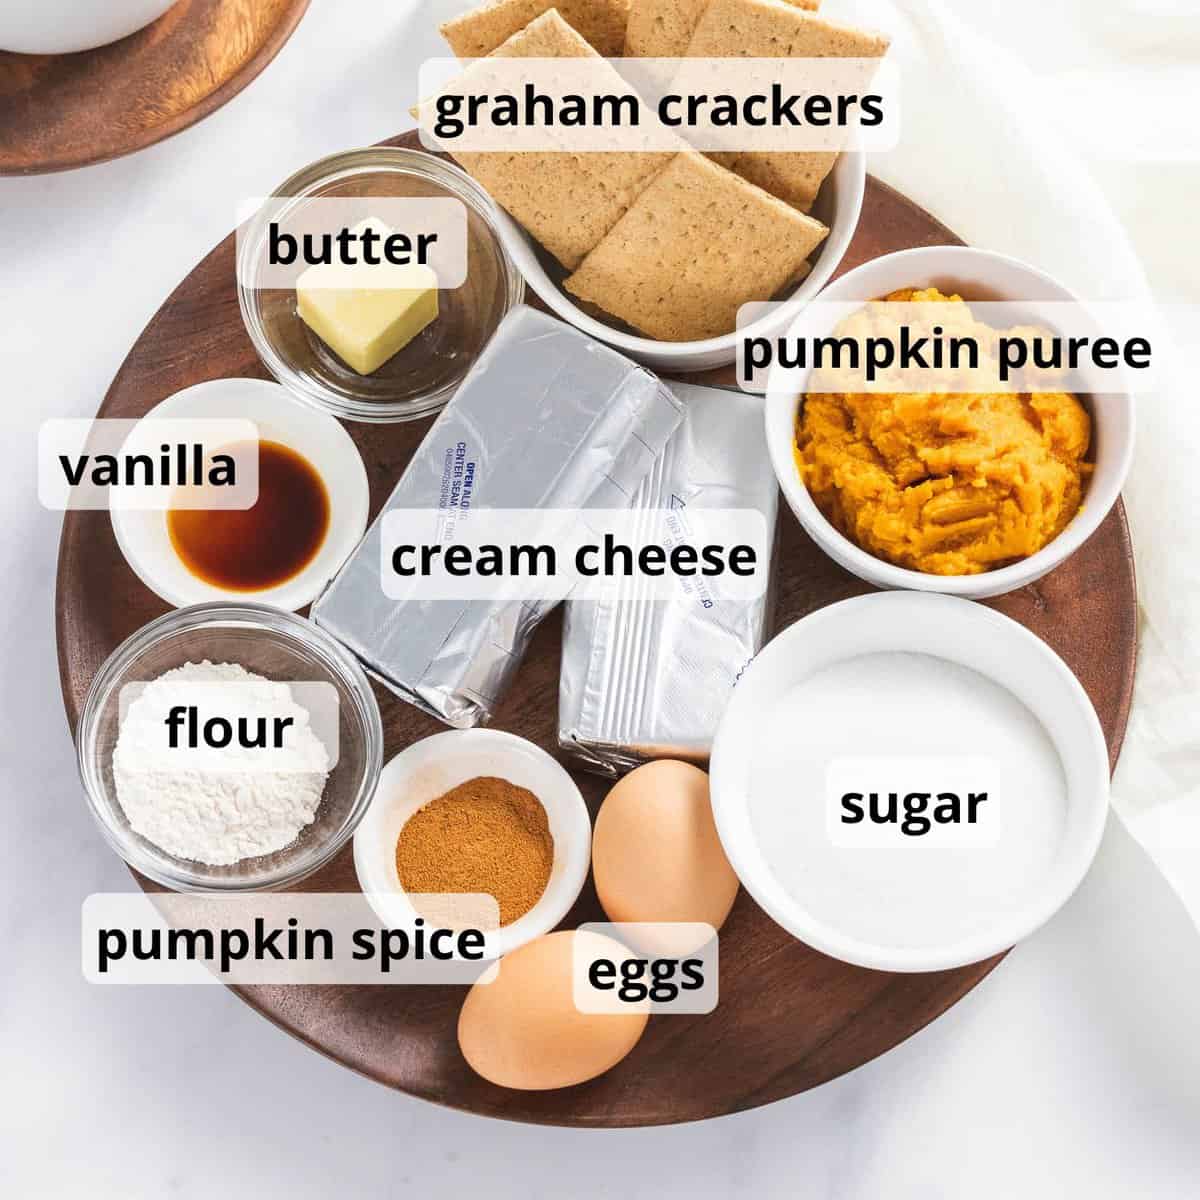 Pumpkin cheesecake ingredients with text overlay.